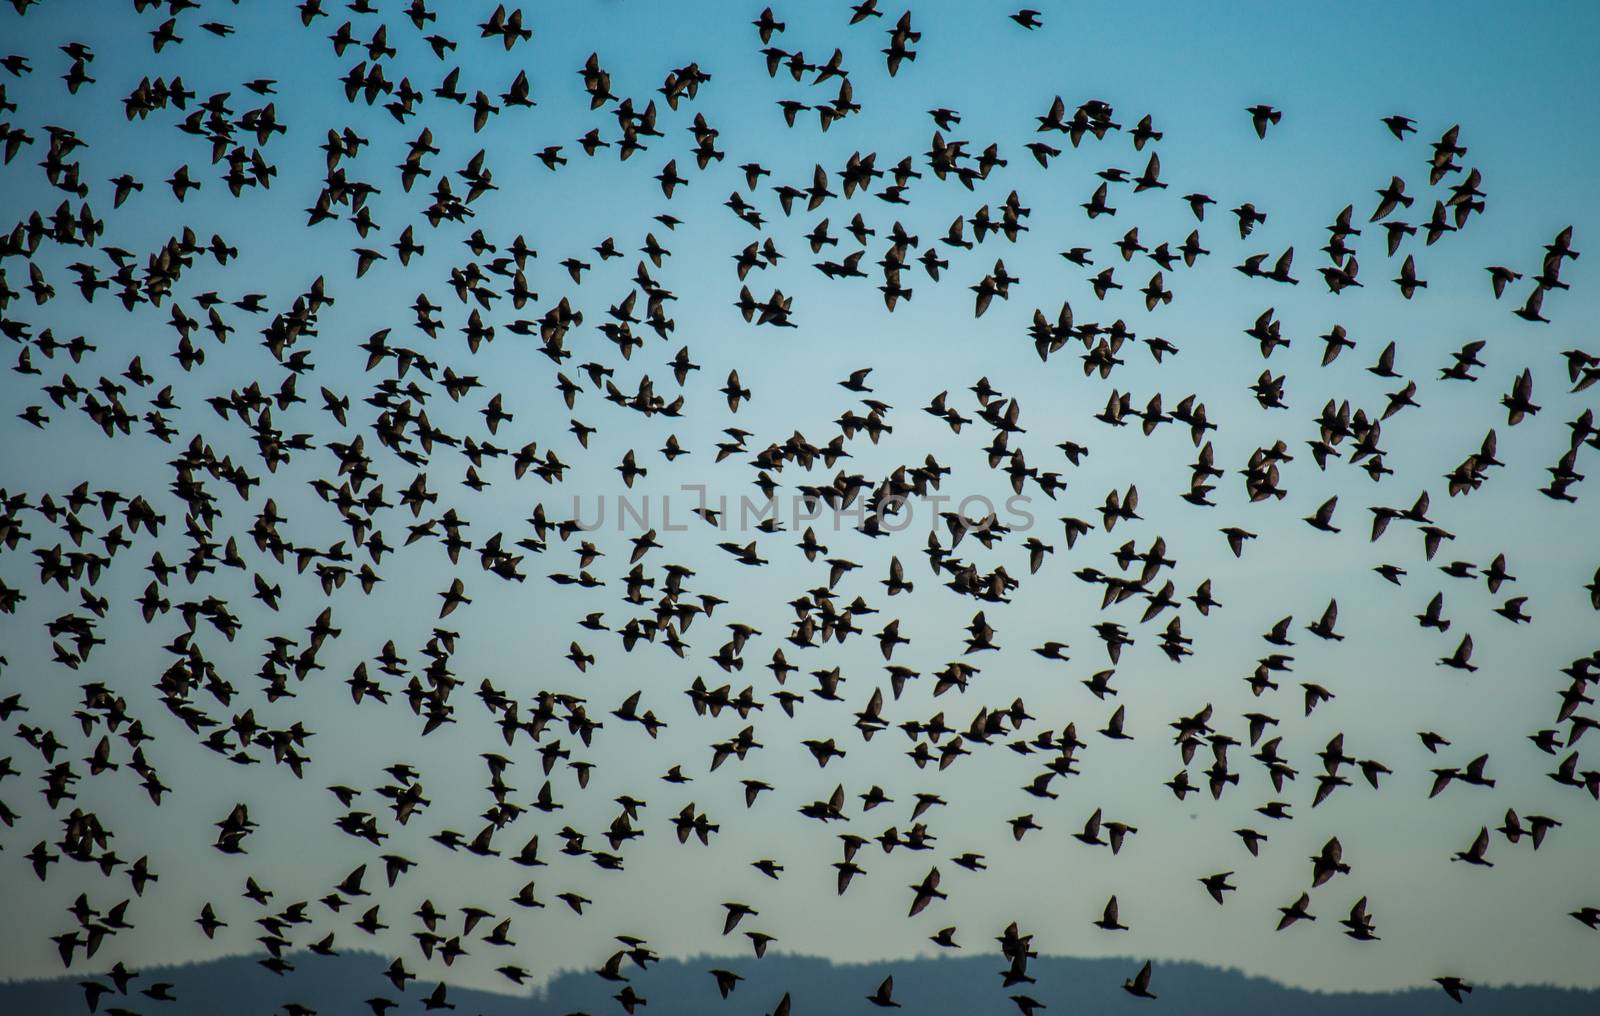 The Swarm of Birds by blegate